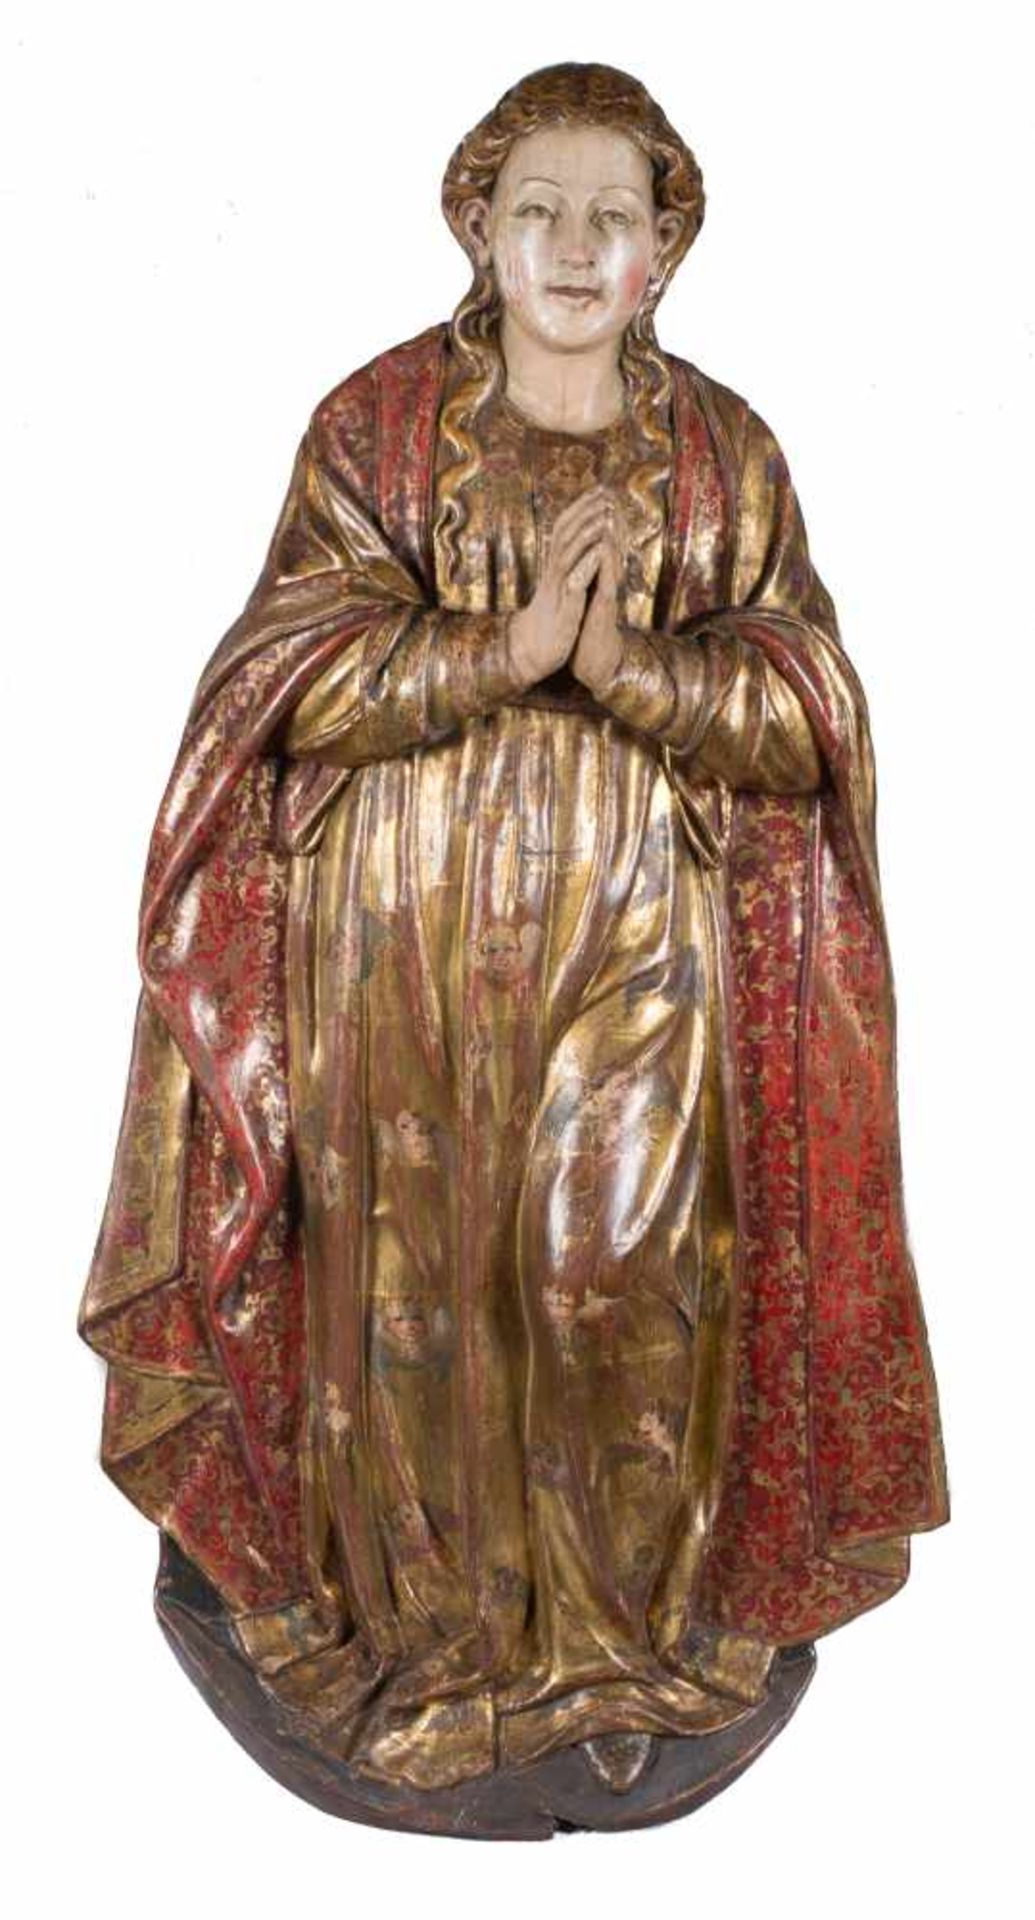 Immaculate Conception. Carved and polychromed wooden sculpture. Castilian School. Valladolid. 16th